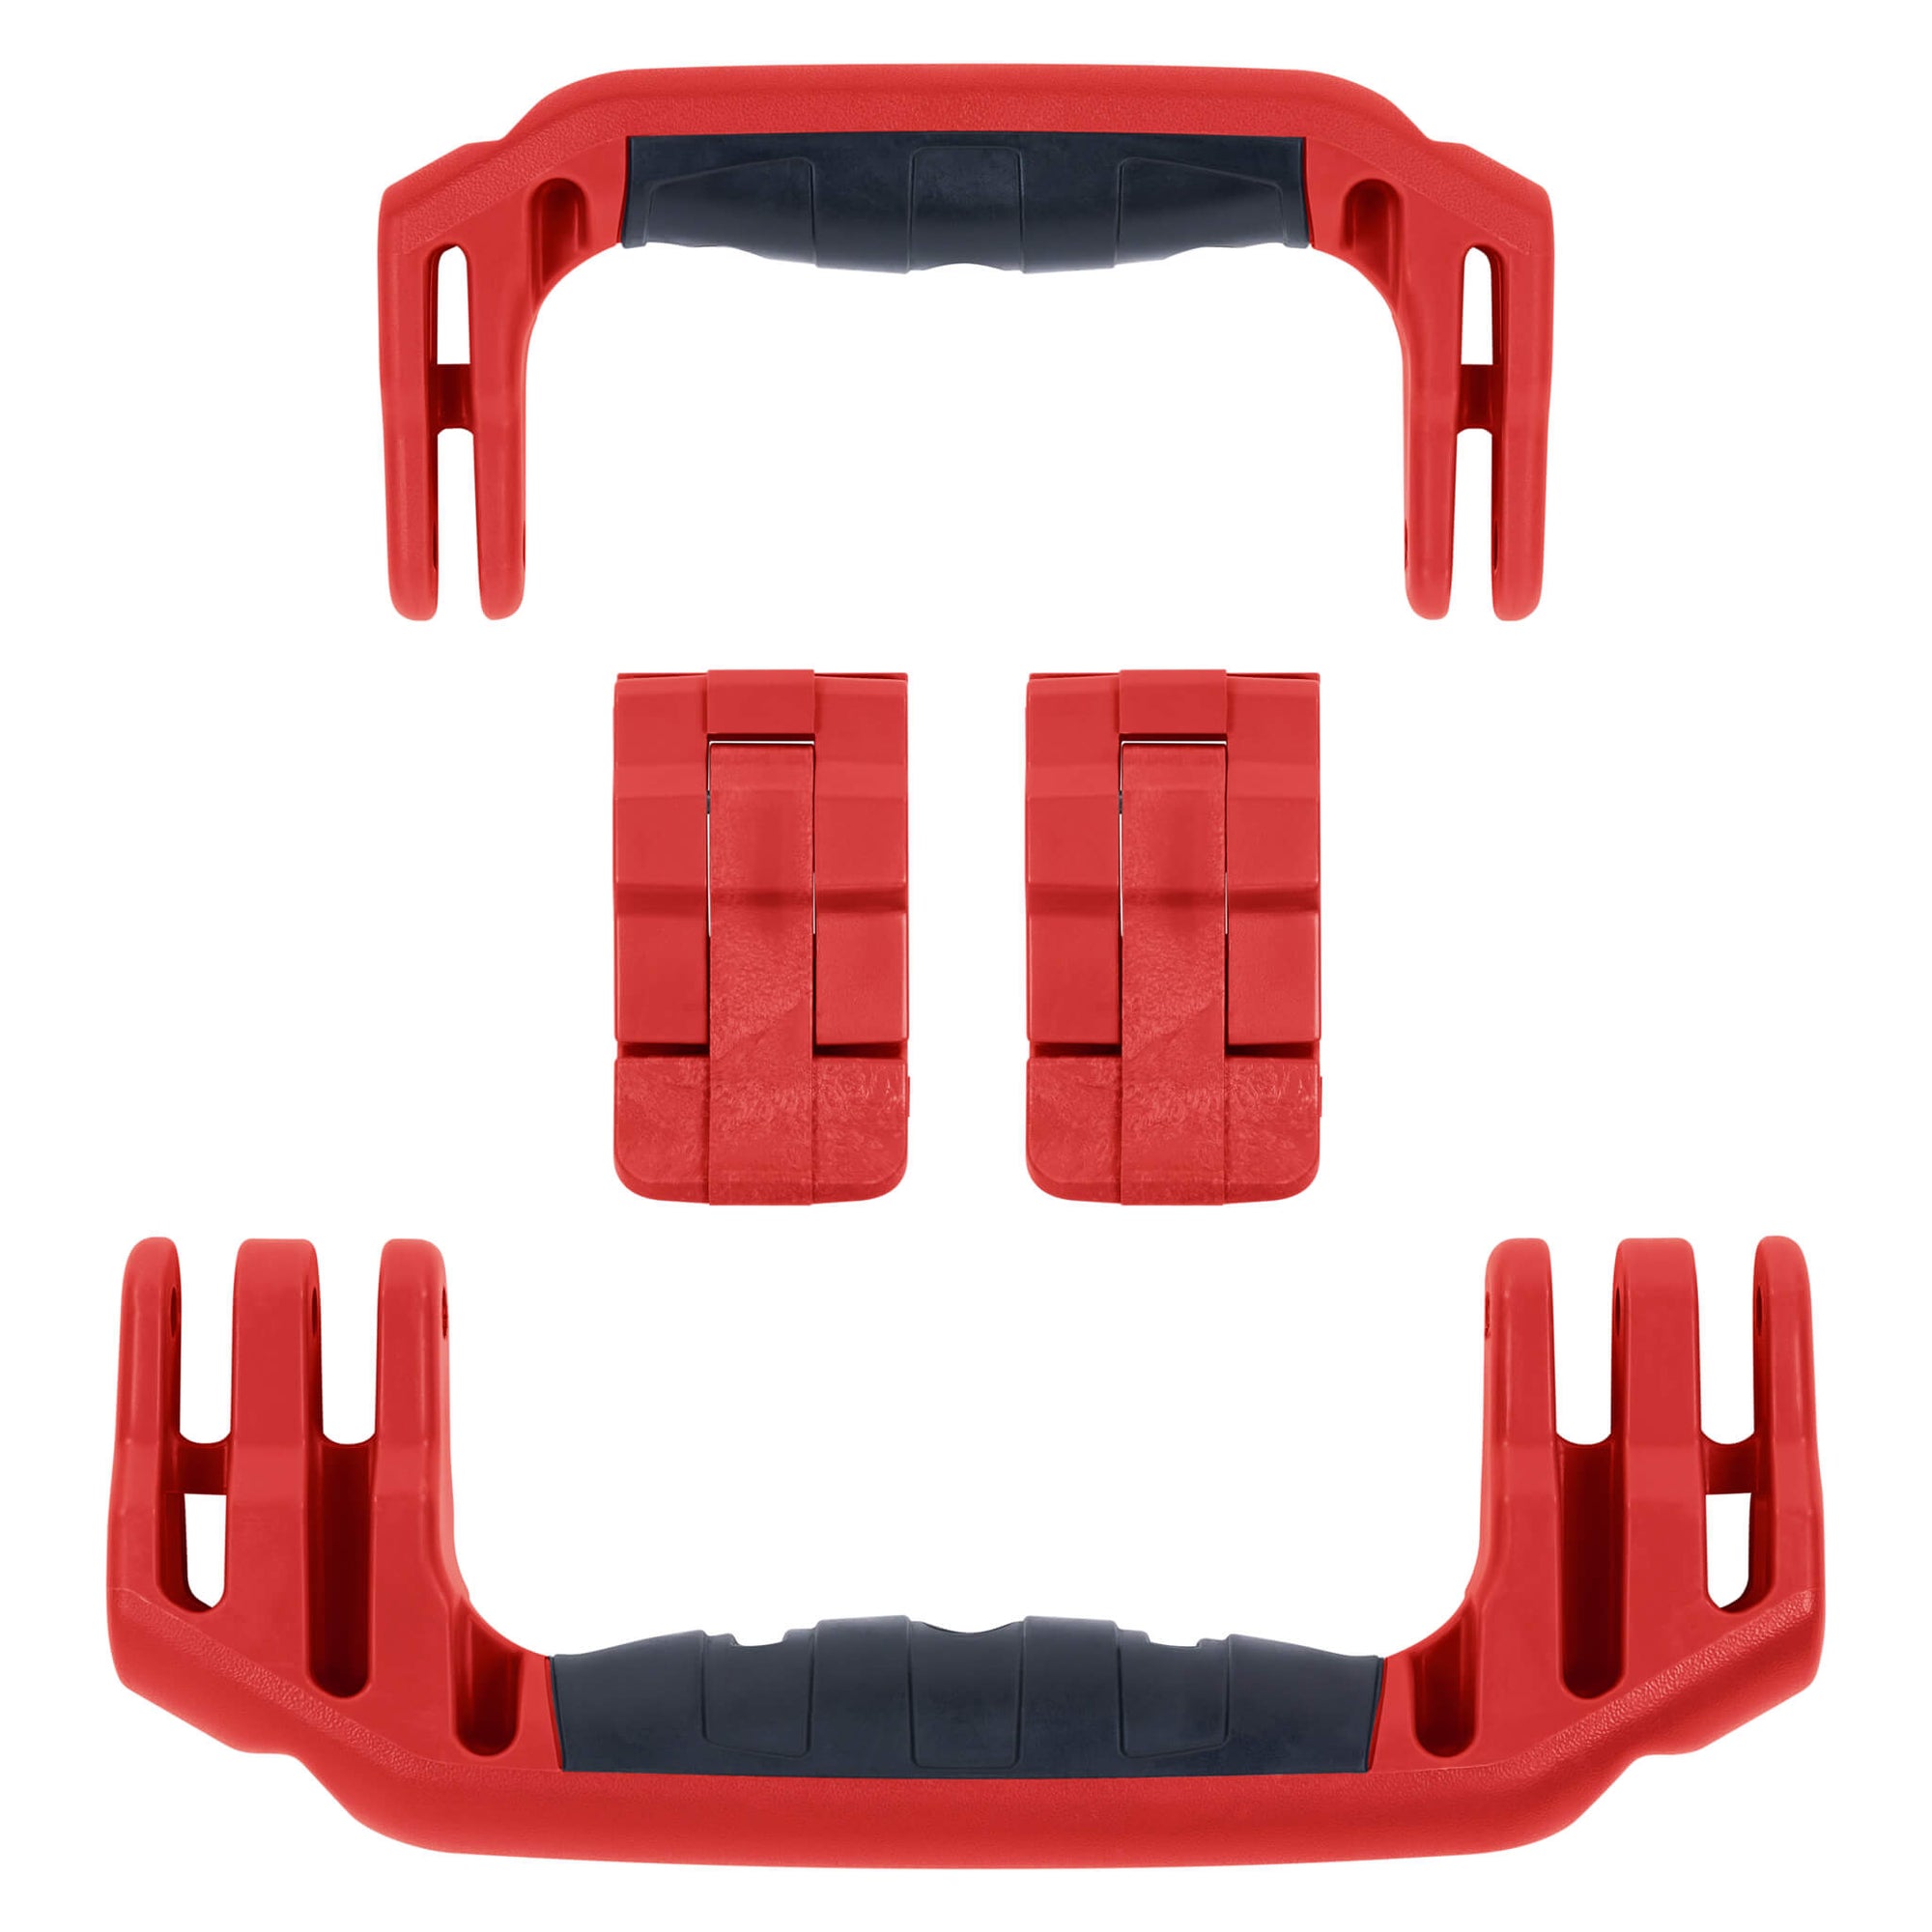 Pelican 1510 Replacement Handles & Latches, Red (Set of 2 Handles, 2 Latches) ColorCase 